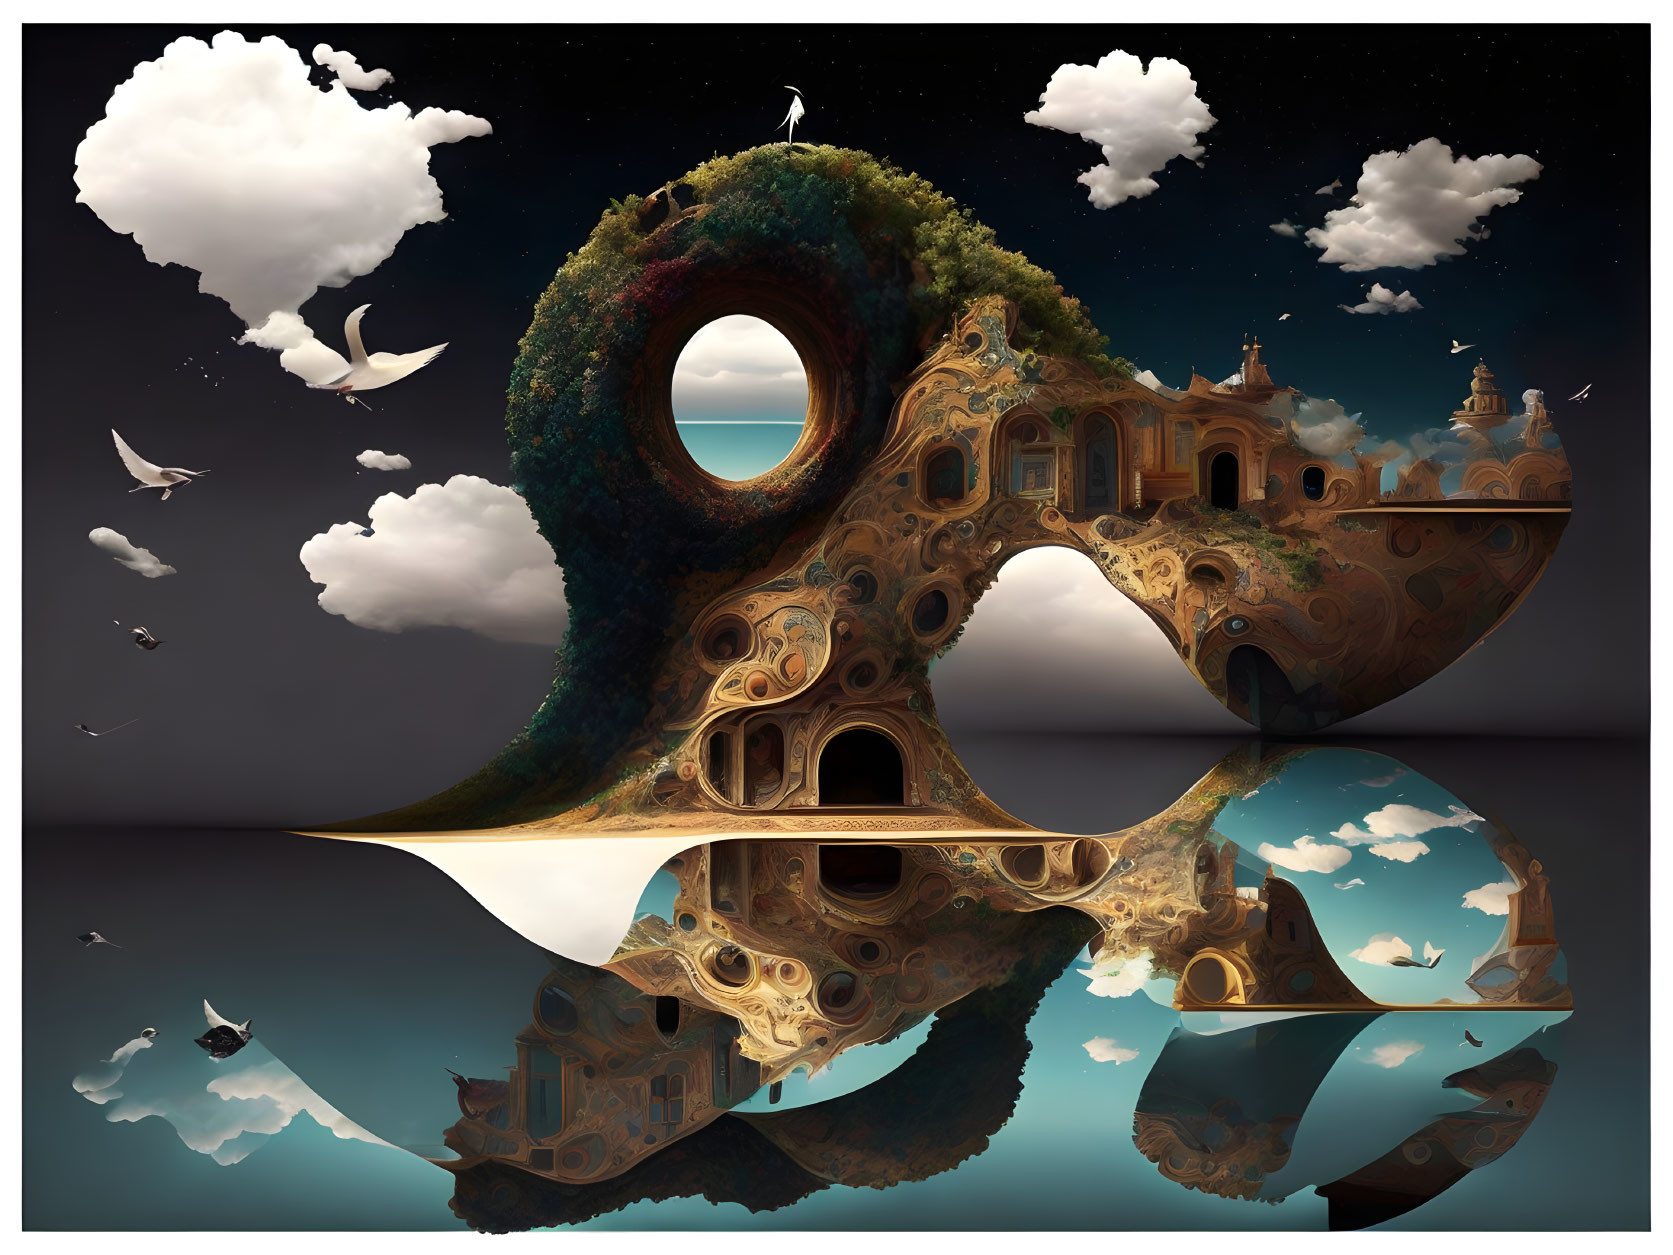 Fantastical surreal artwork: structure with arches, eye-like openings, clouds, birds, twilight